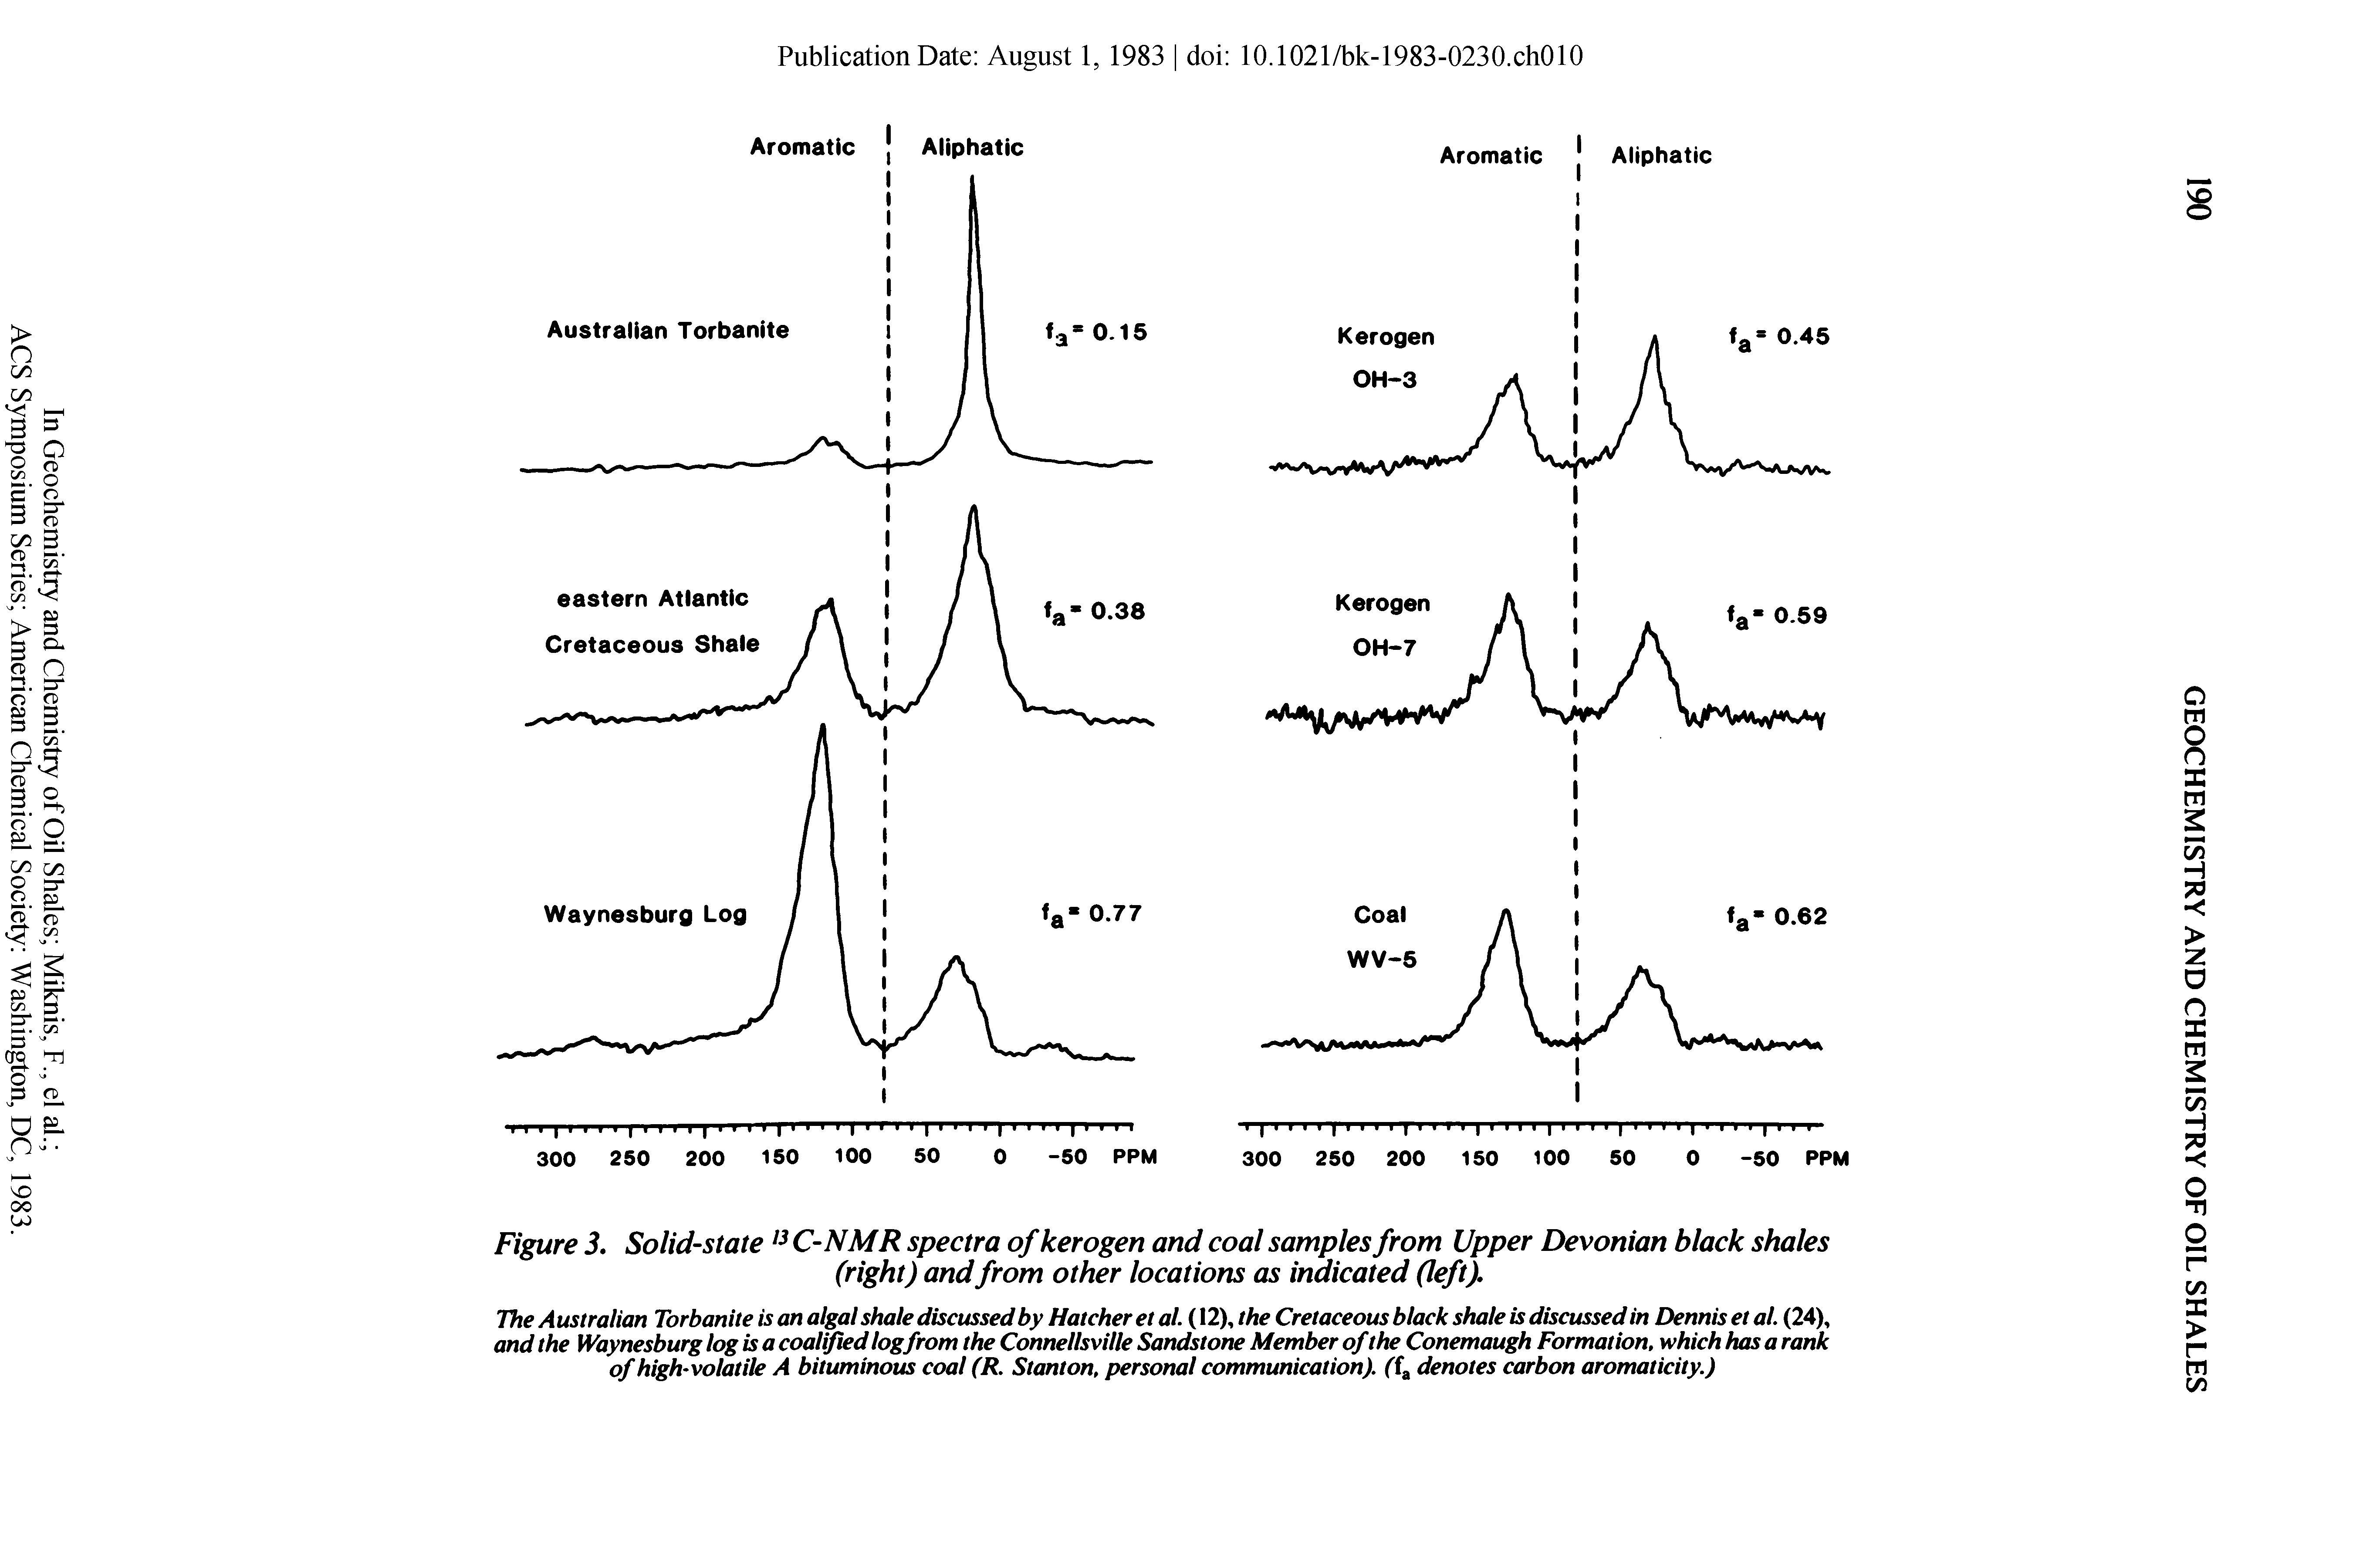 Figure 3, Solid-state 13 C-NMR spectra of kerogen and coal samples from Upper Devonian black shales (right) and from other locations as indicated (left).